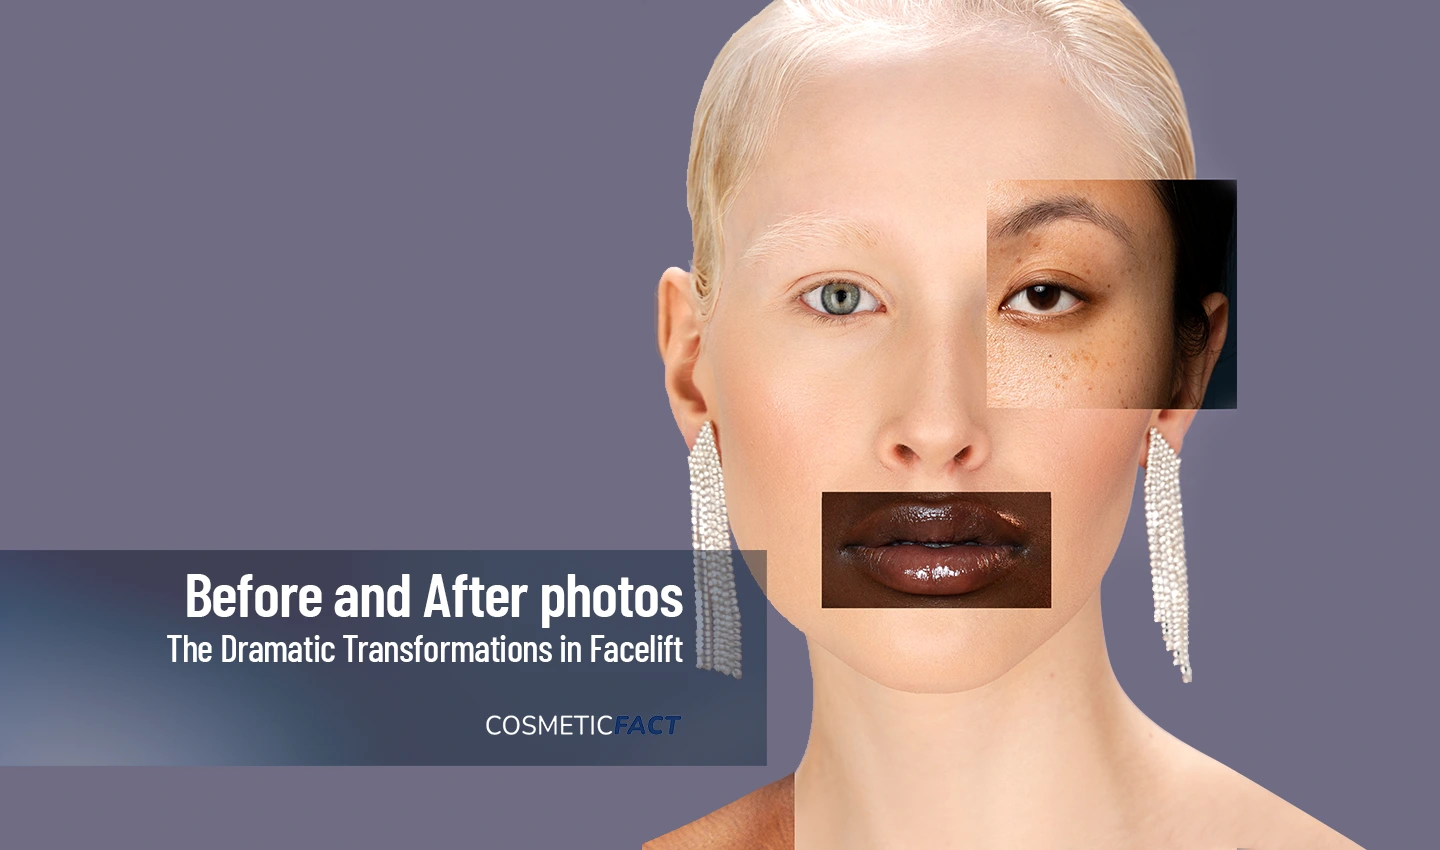 Dramatic Transformations in Facelift Before and After Photos